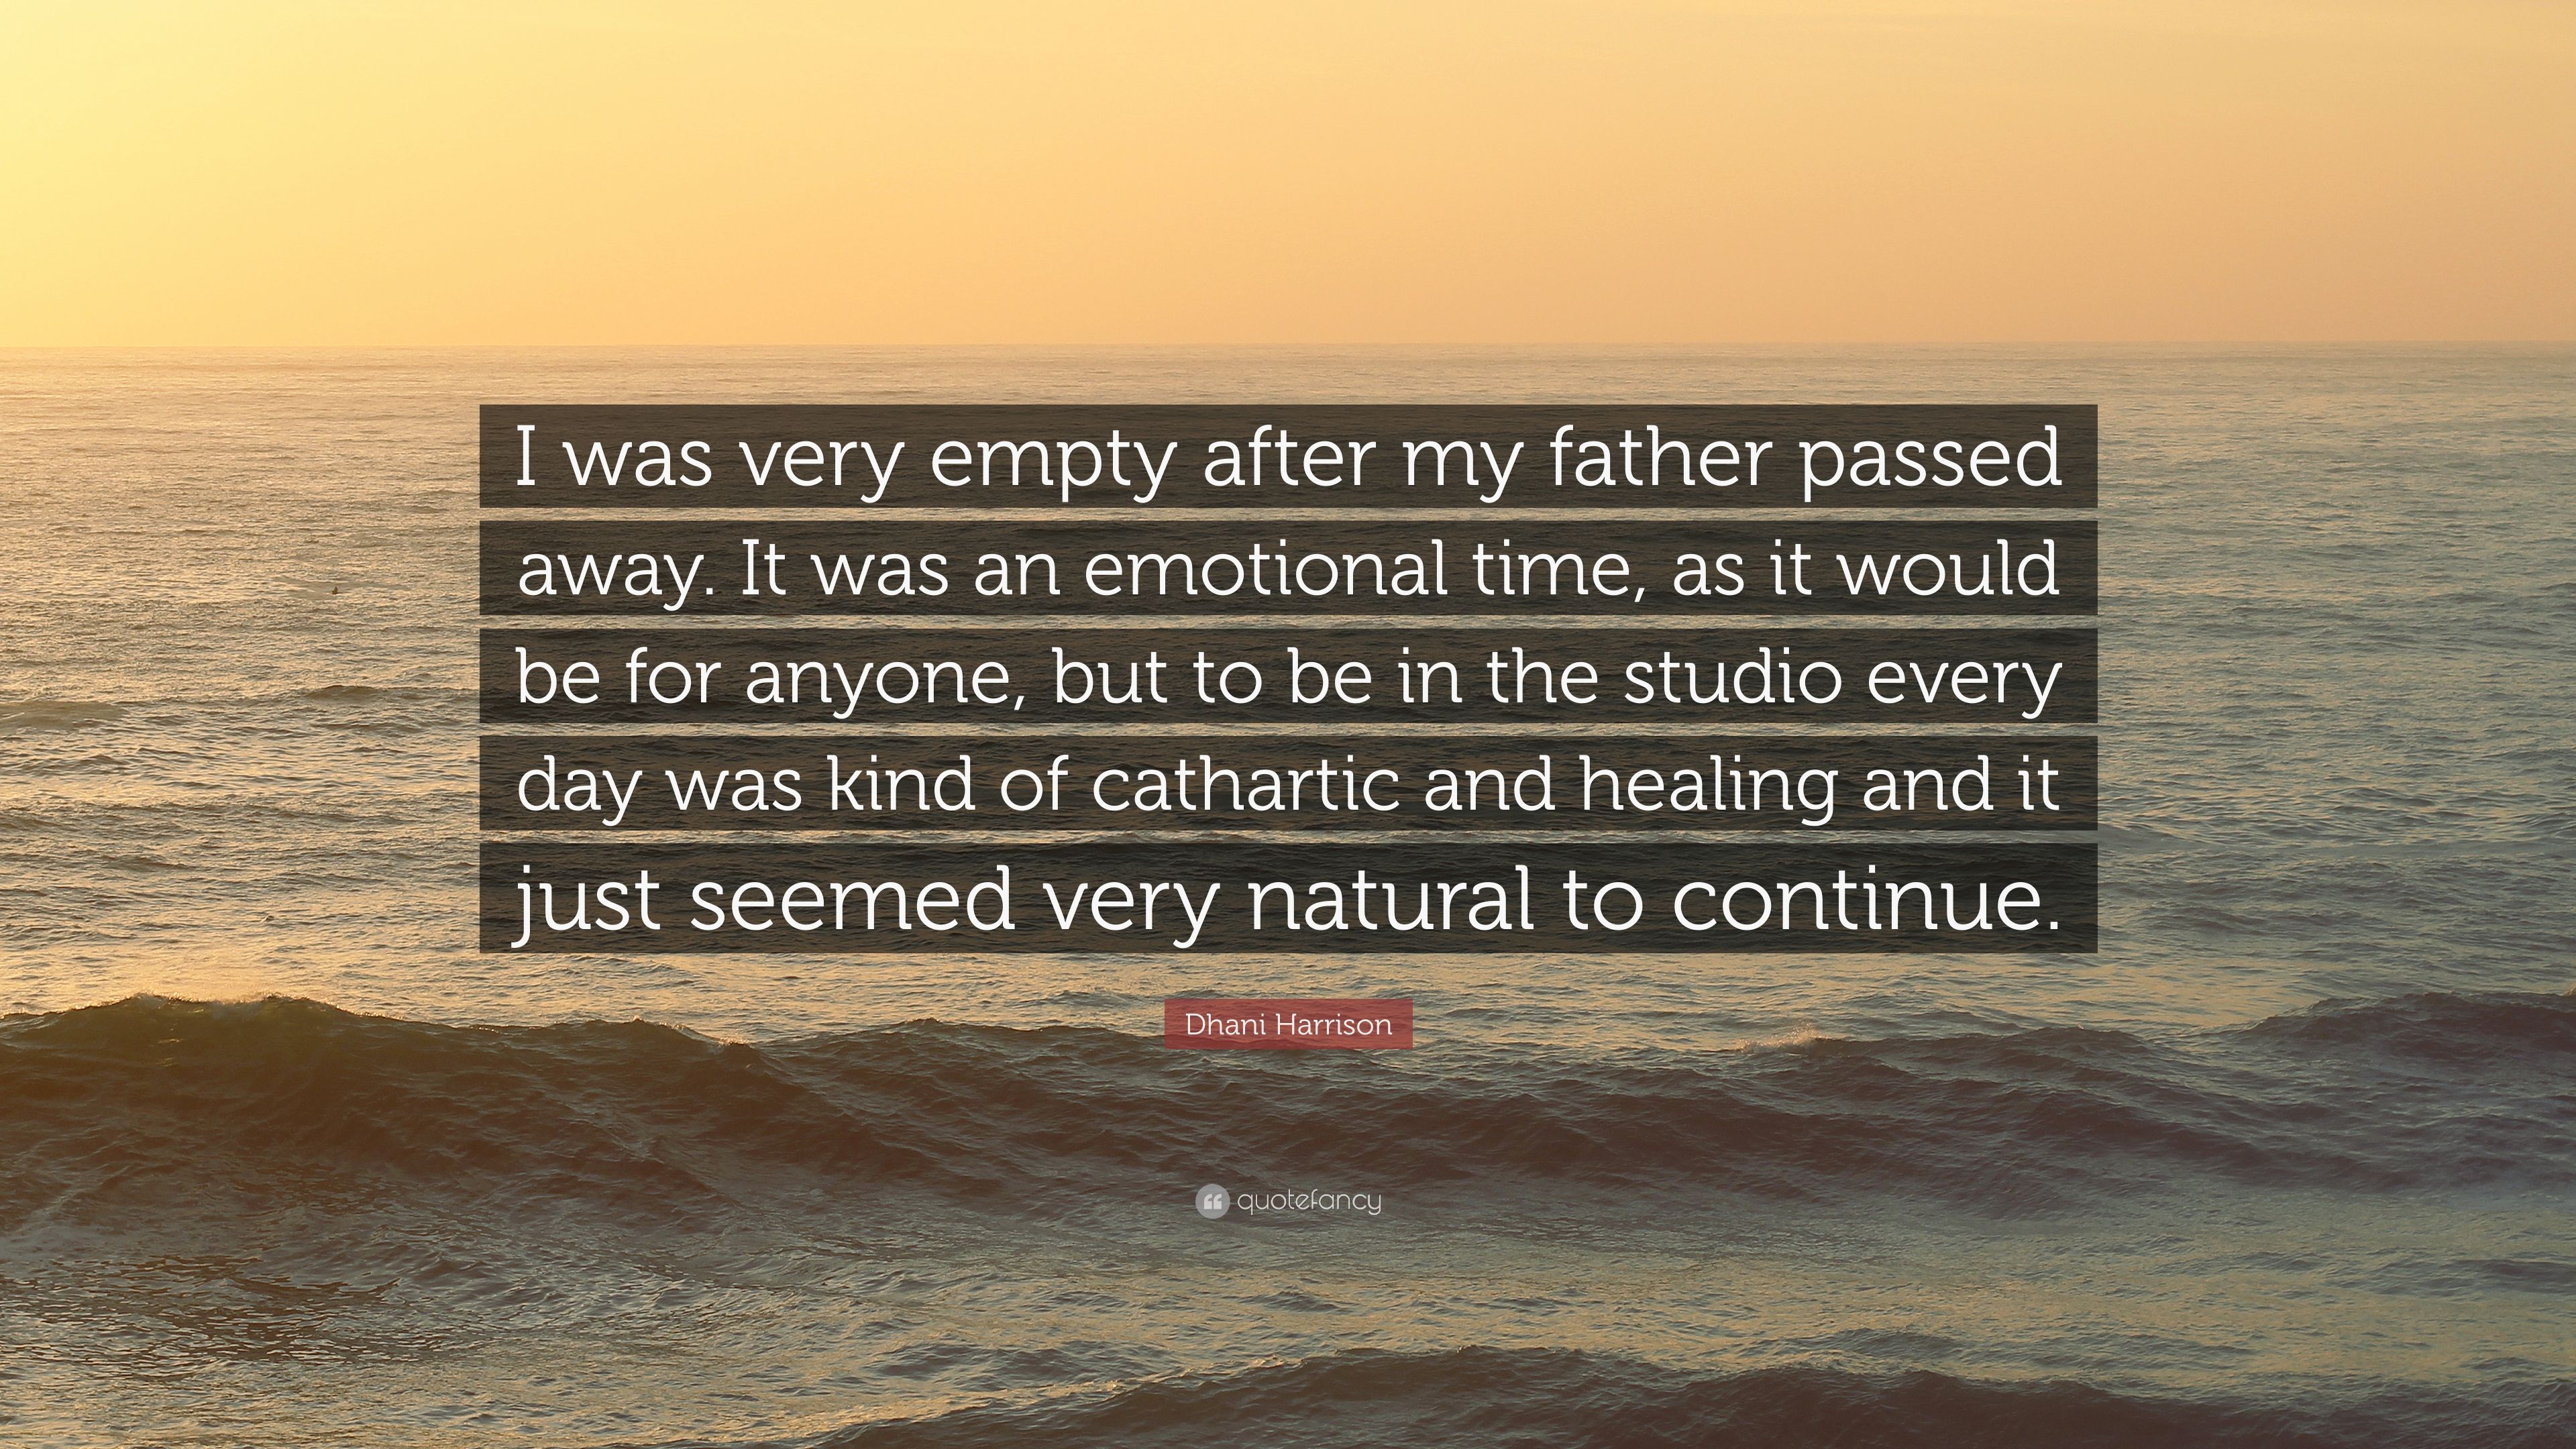 Dhani Harrison Quote: “I was very empty after my father passed